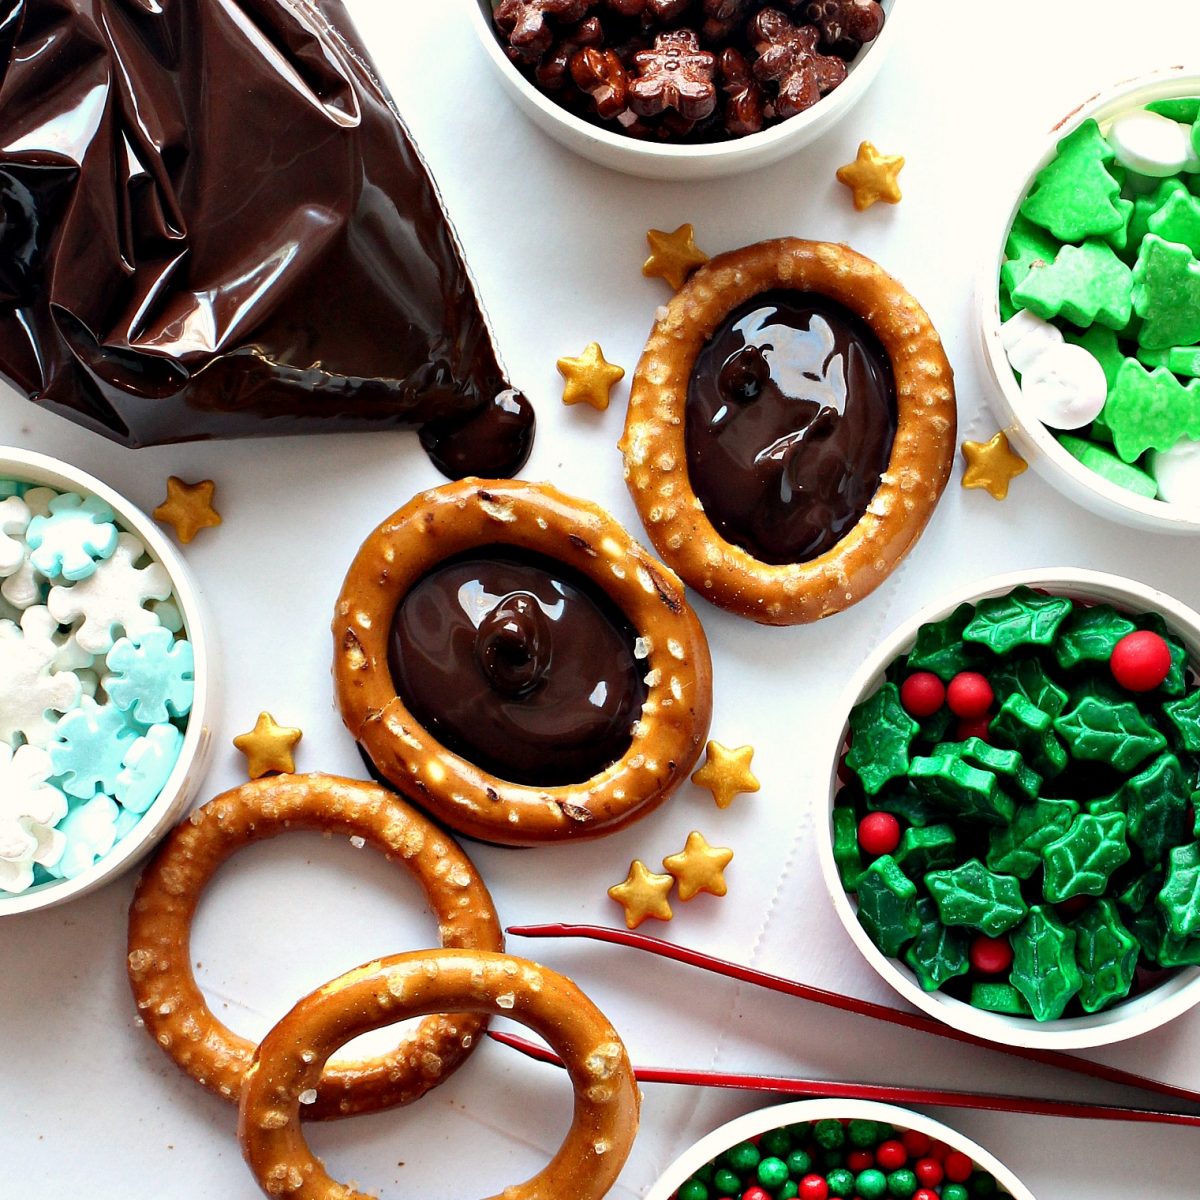 Pretzel rings with centers filled with melted chocolate surrounded by sprinkles for decorating.